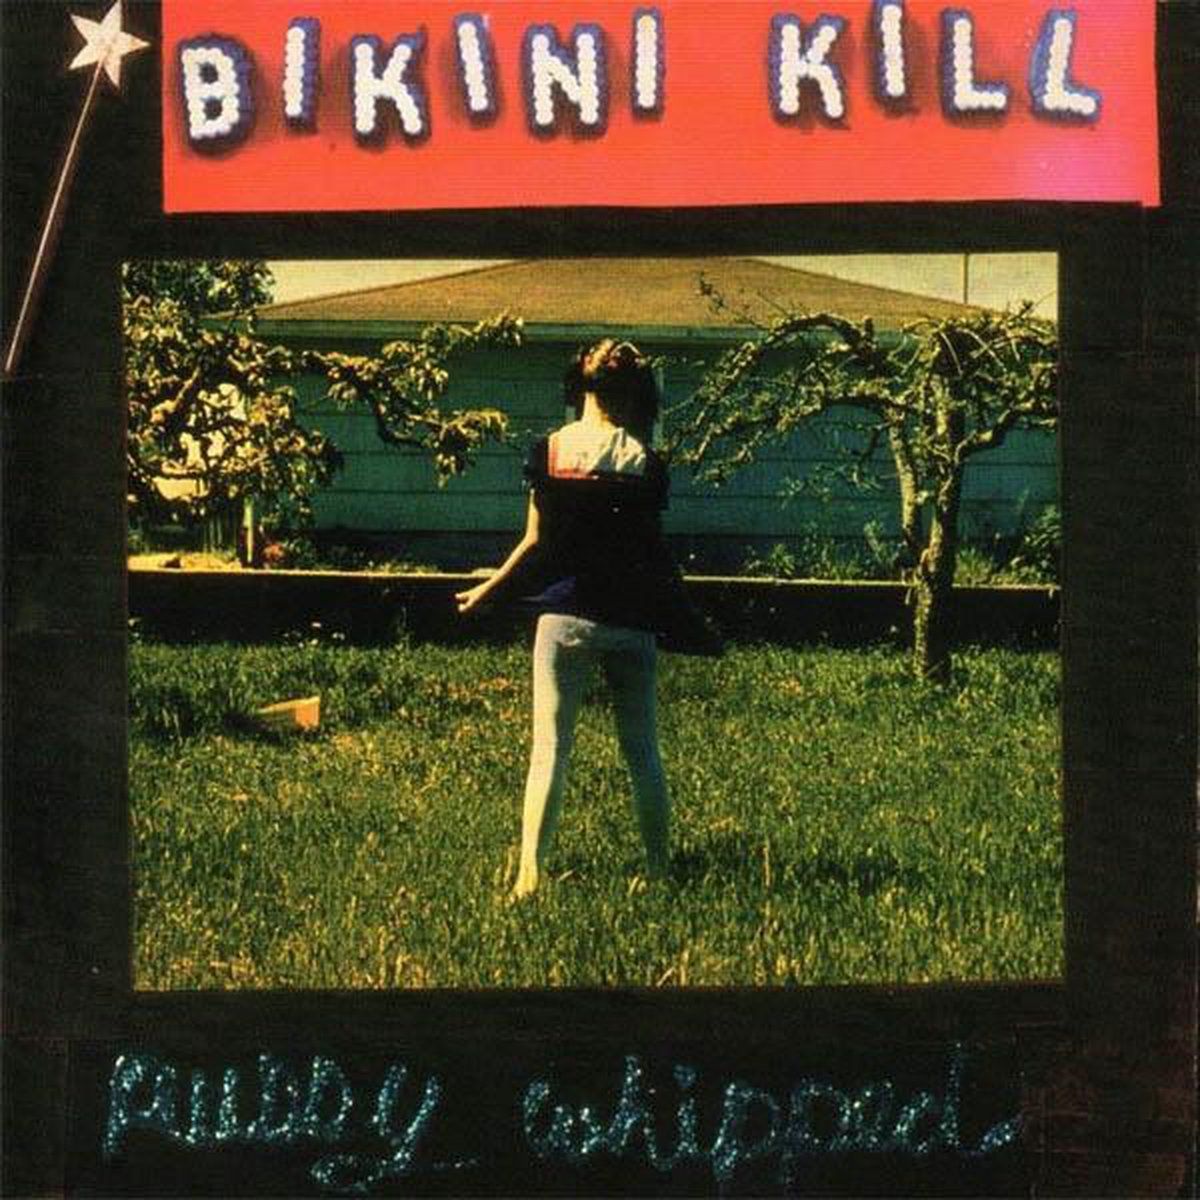 Bikini Kill - Pussy Whipped (2019 reissue with download code) - Vinyl - New